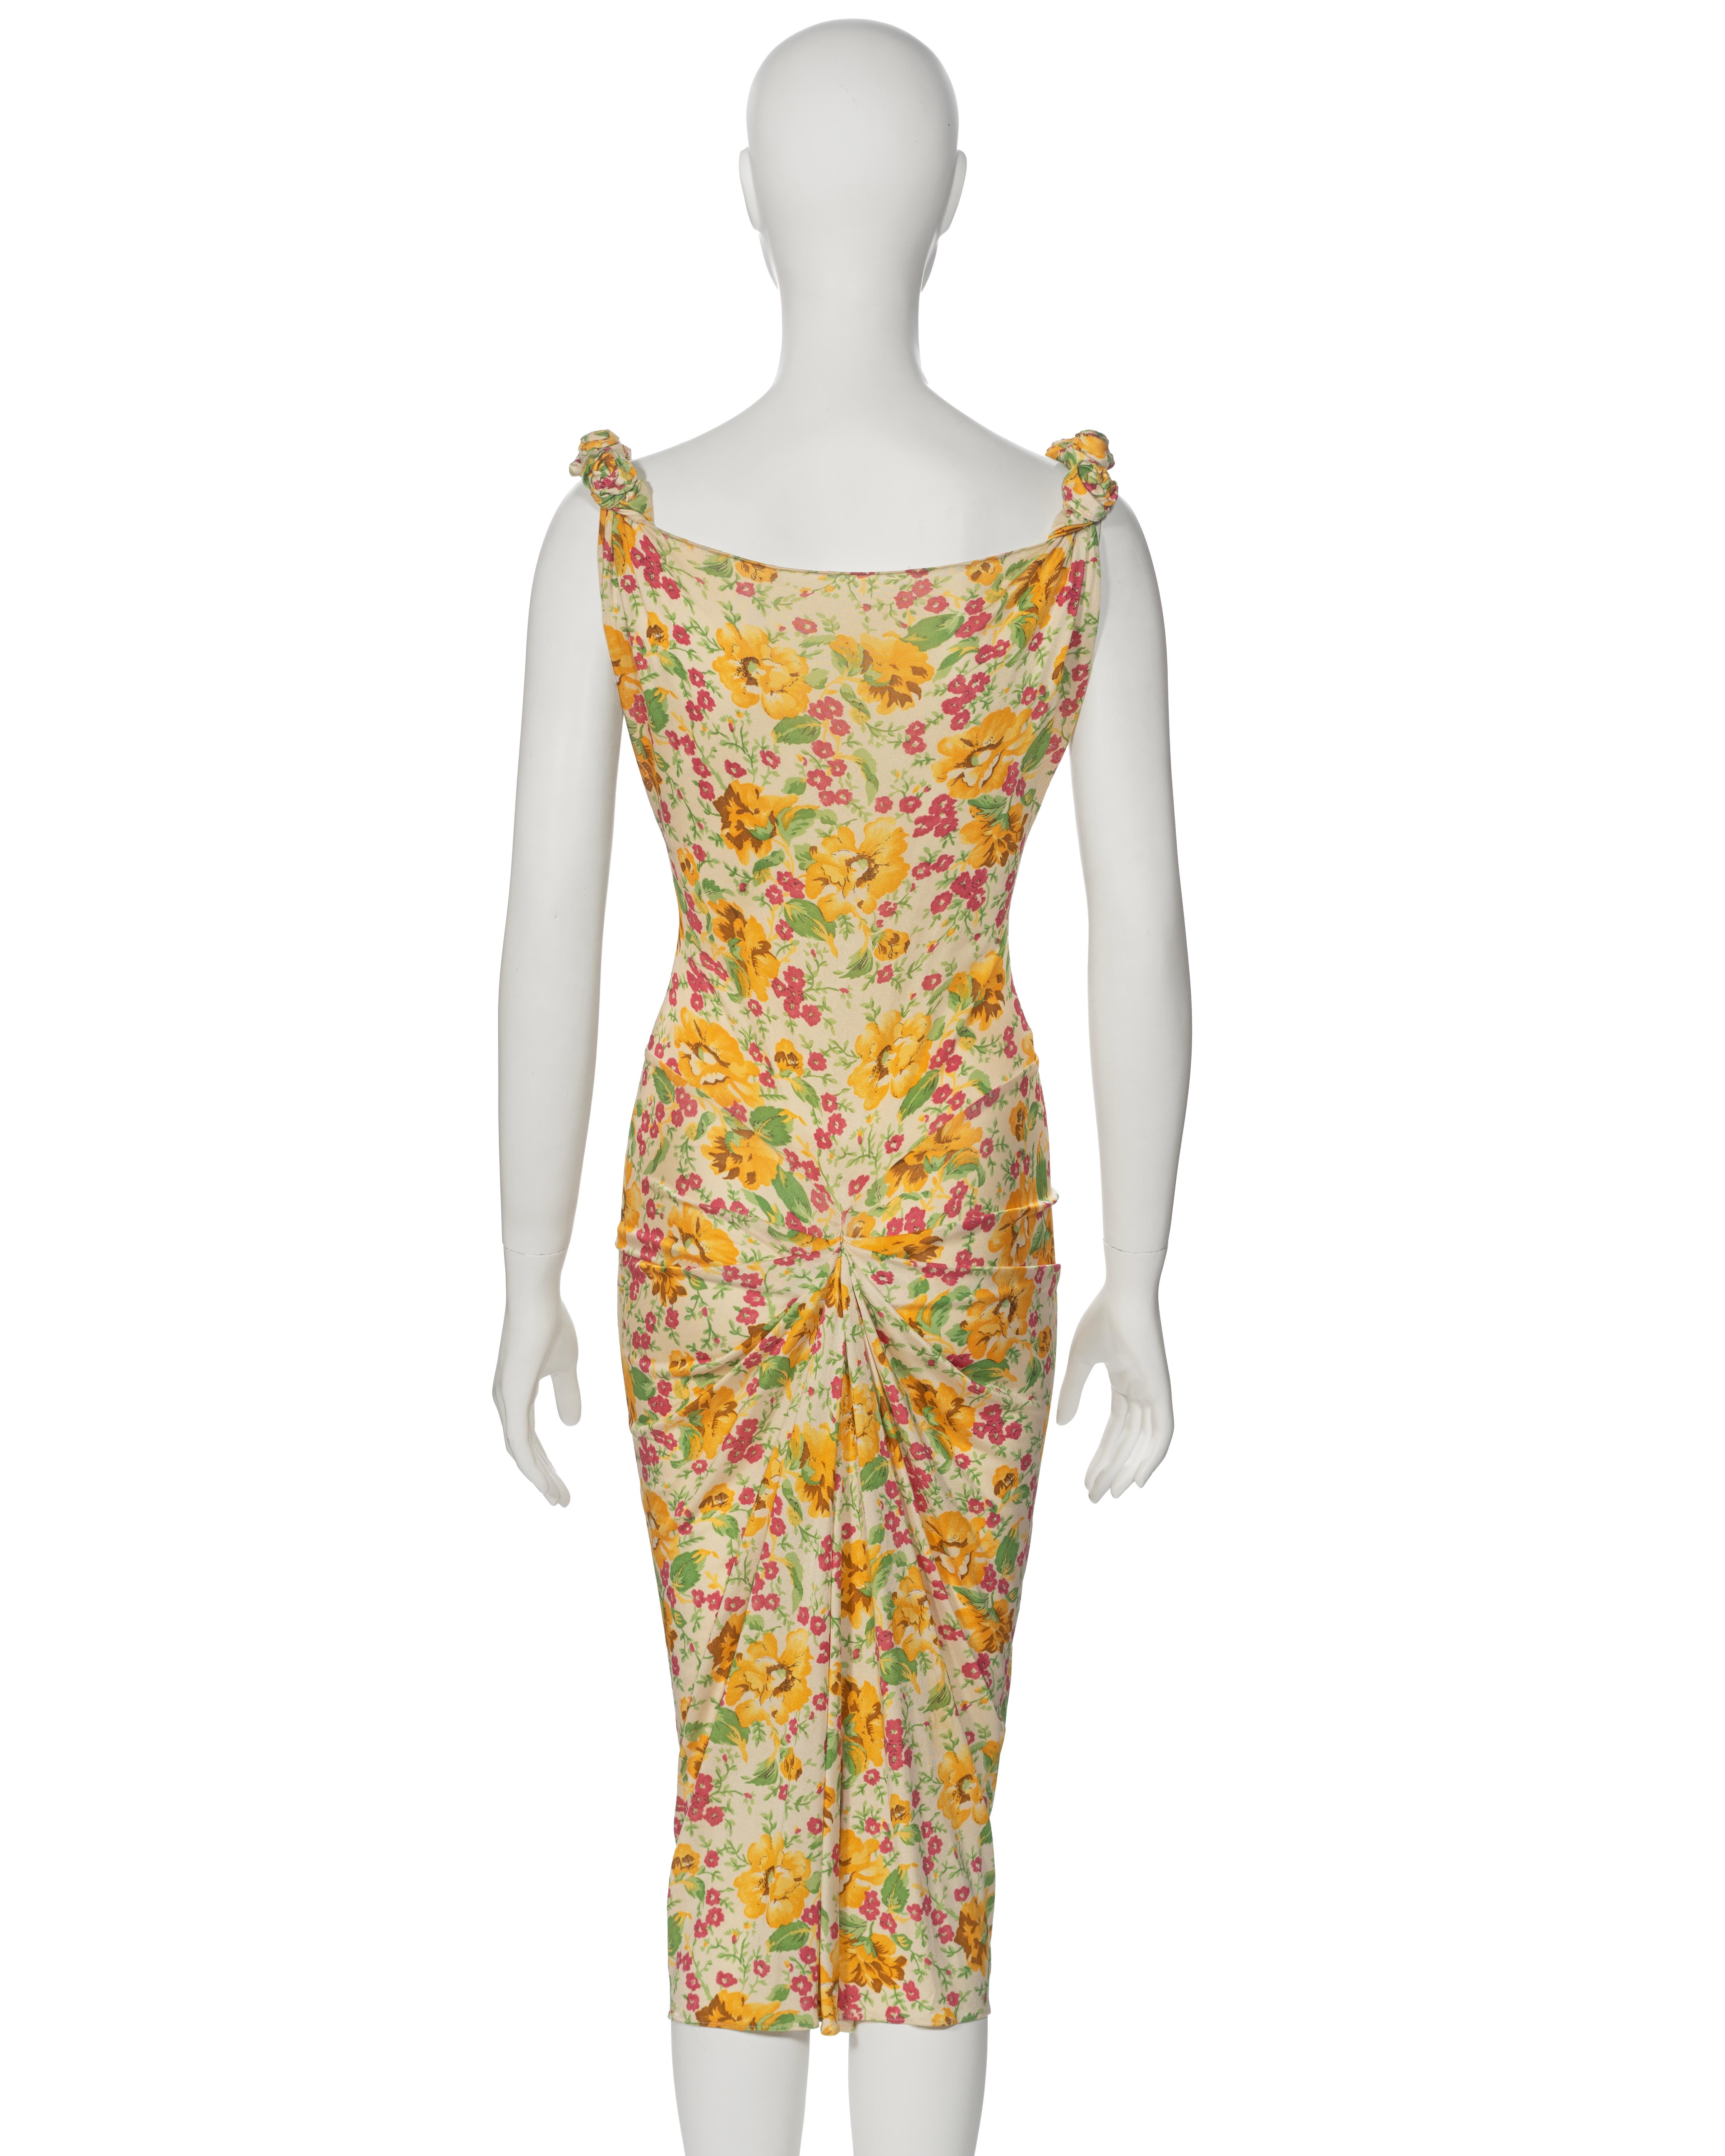 Christian Dior by John Galliano Floral Silk Jersey Cocktail Dress, ss 2000 7